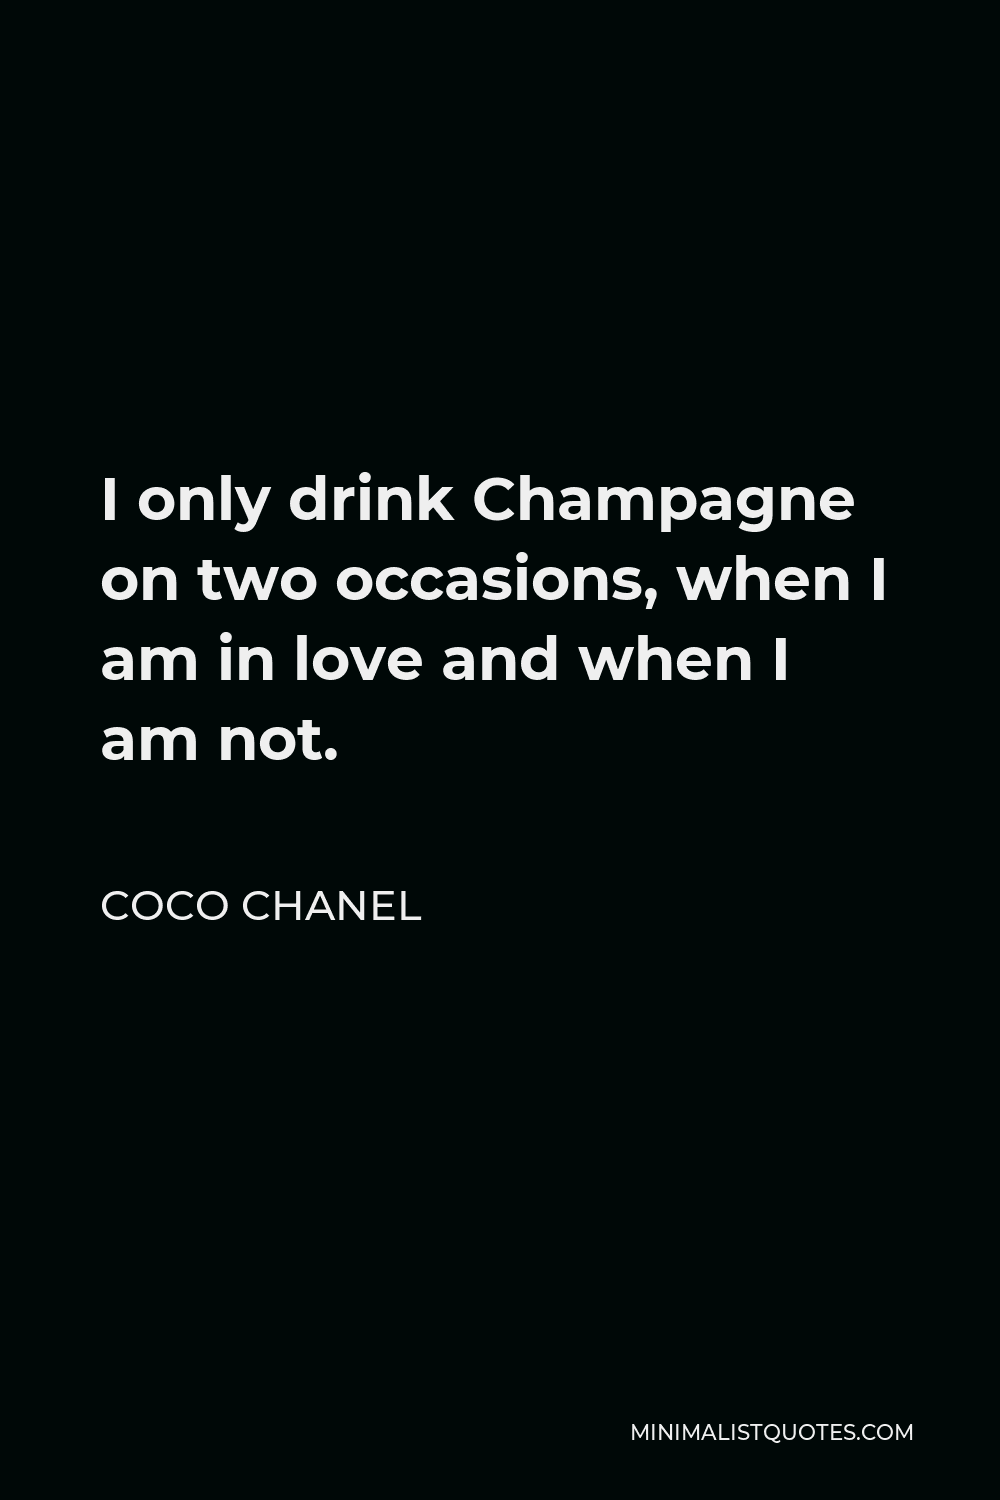 i only drink champagne coco chanel quote greeting card  sweet gumball